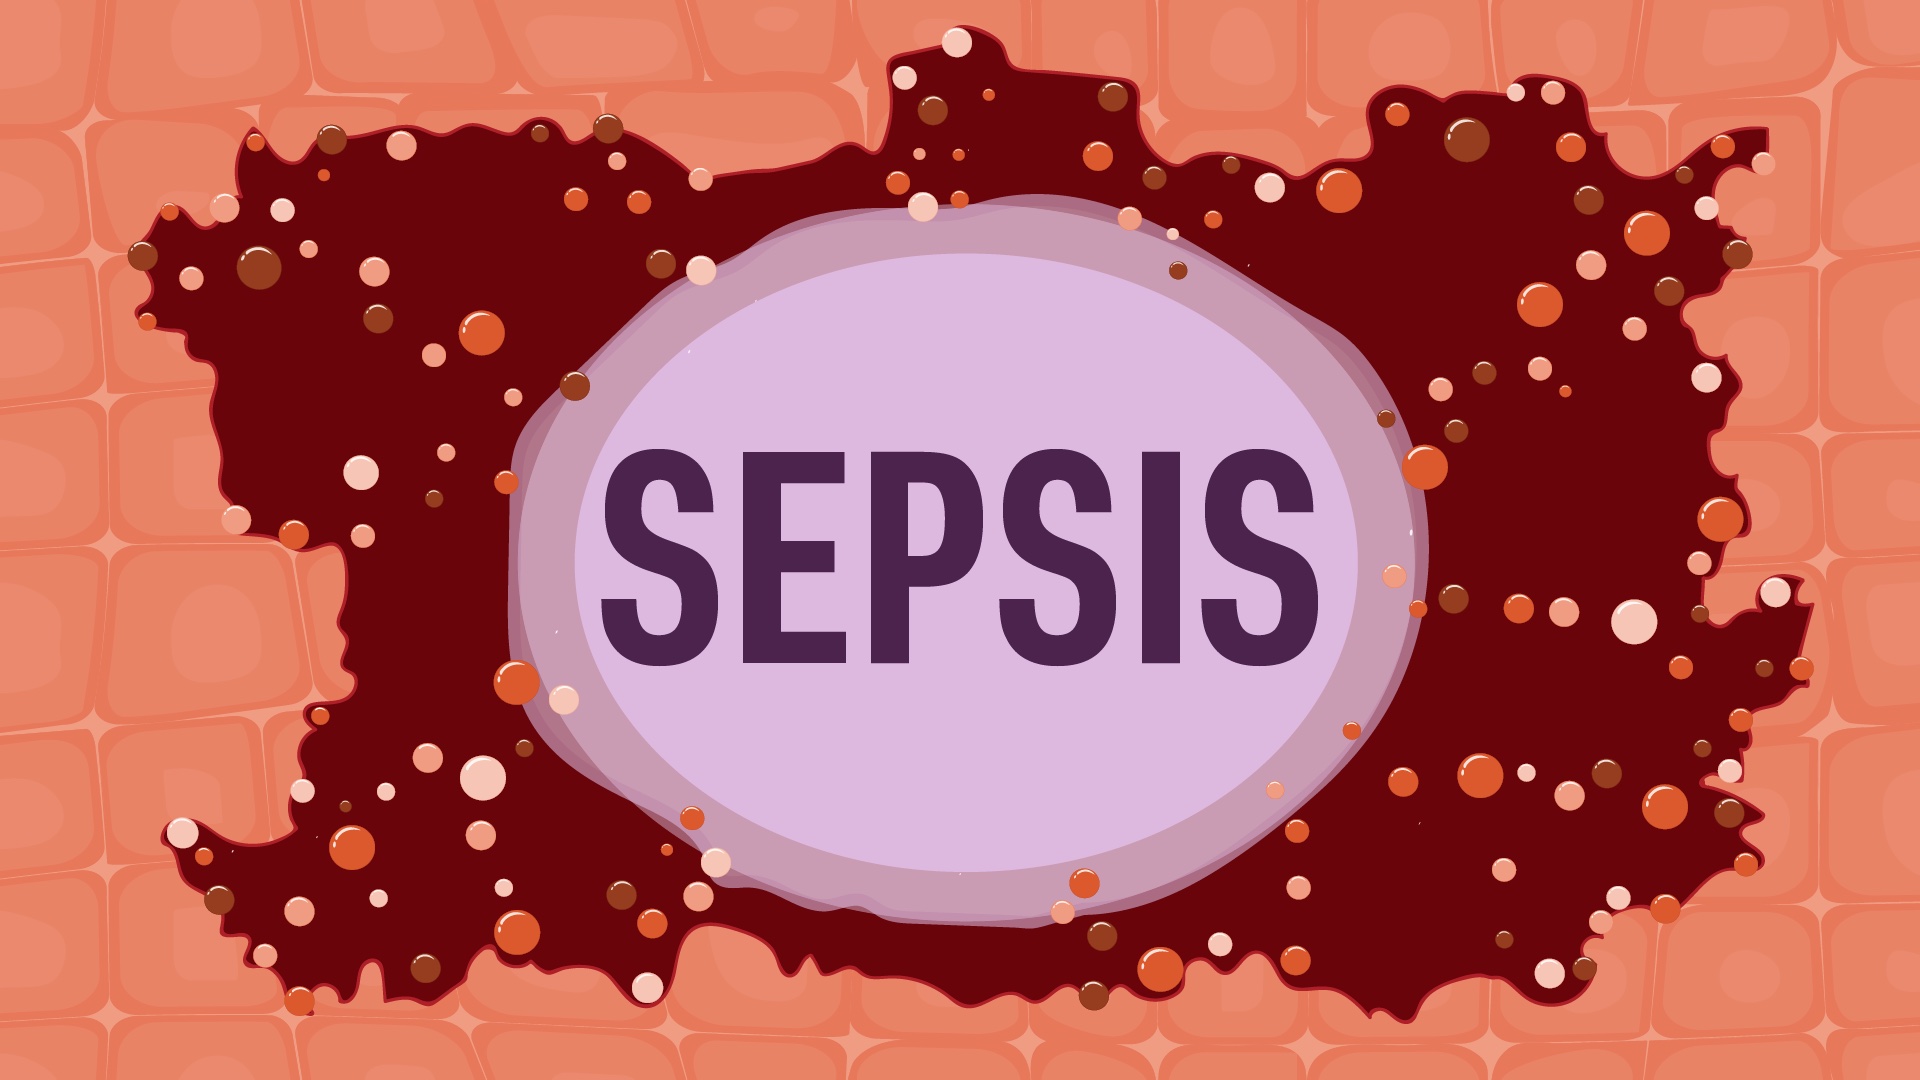 Cover image for: Sepsis